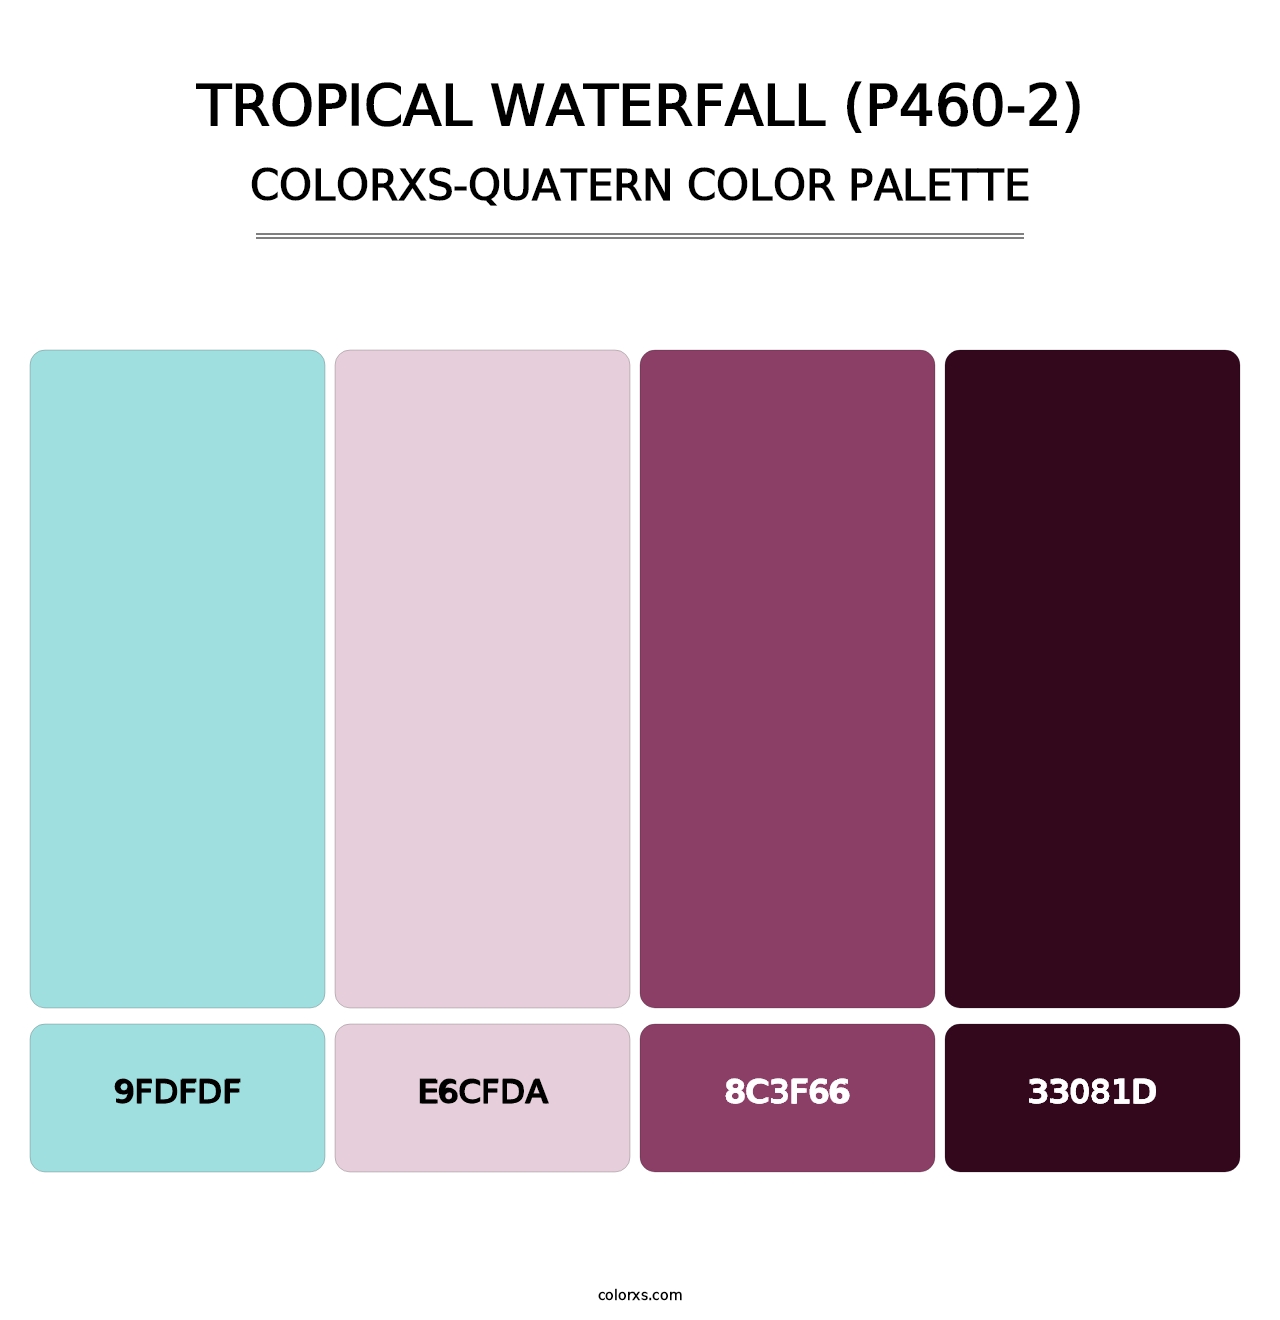 Tropical Waterfall (P460-2) - Colorxs Quatern Palette